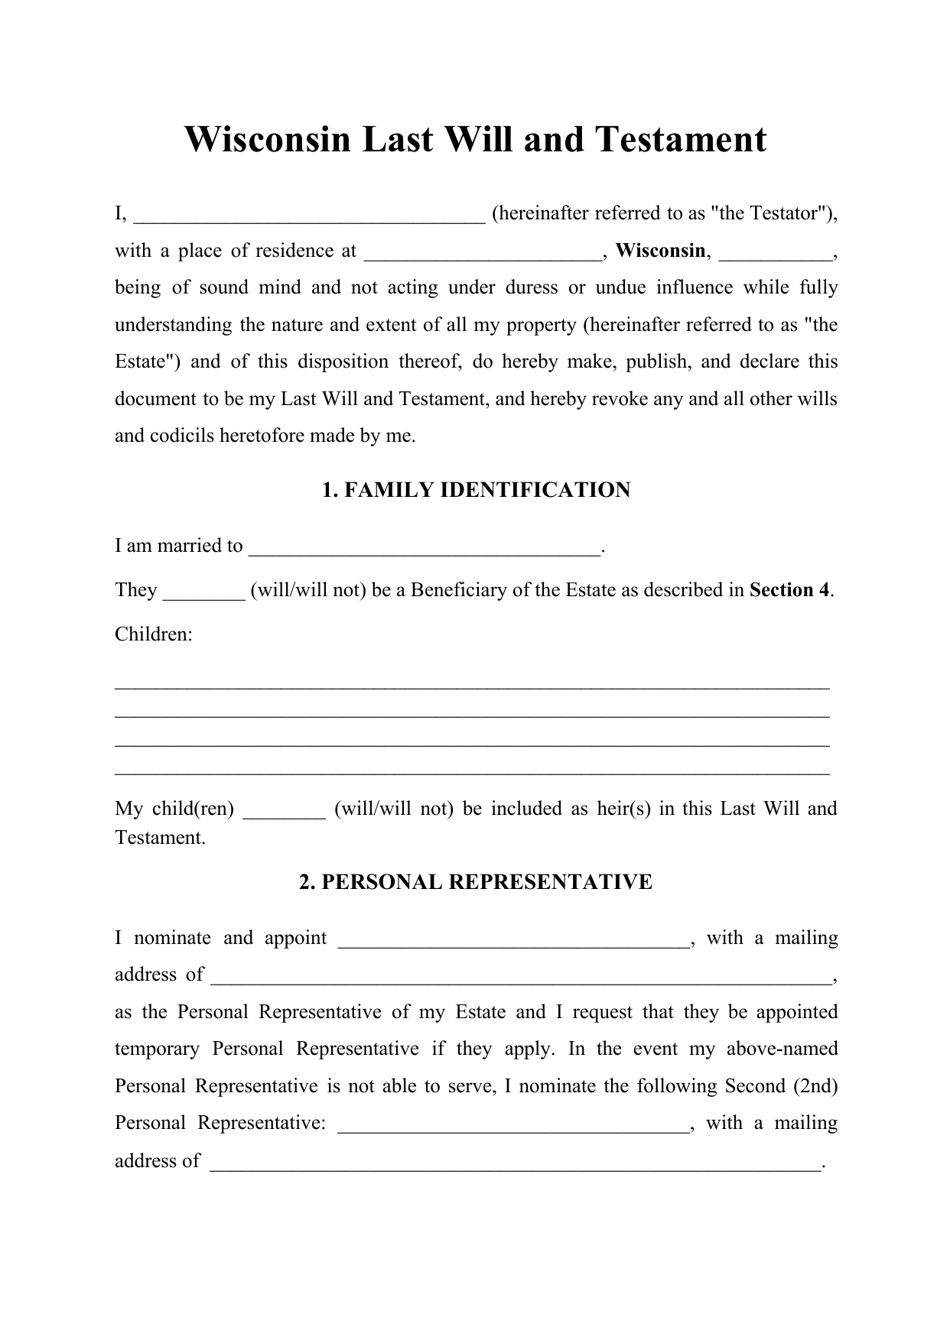 Wisconsin Last Will and Testament Template